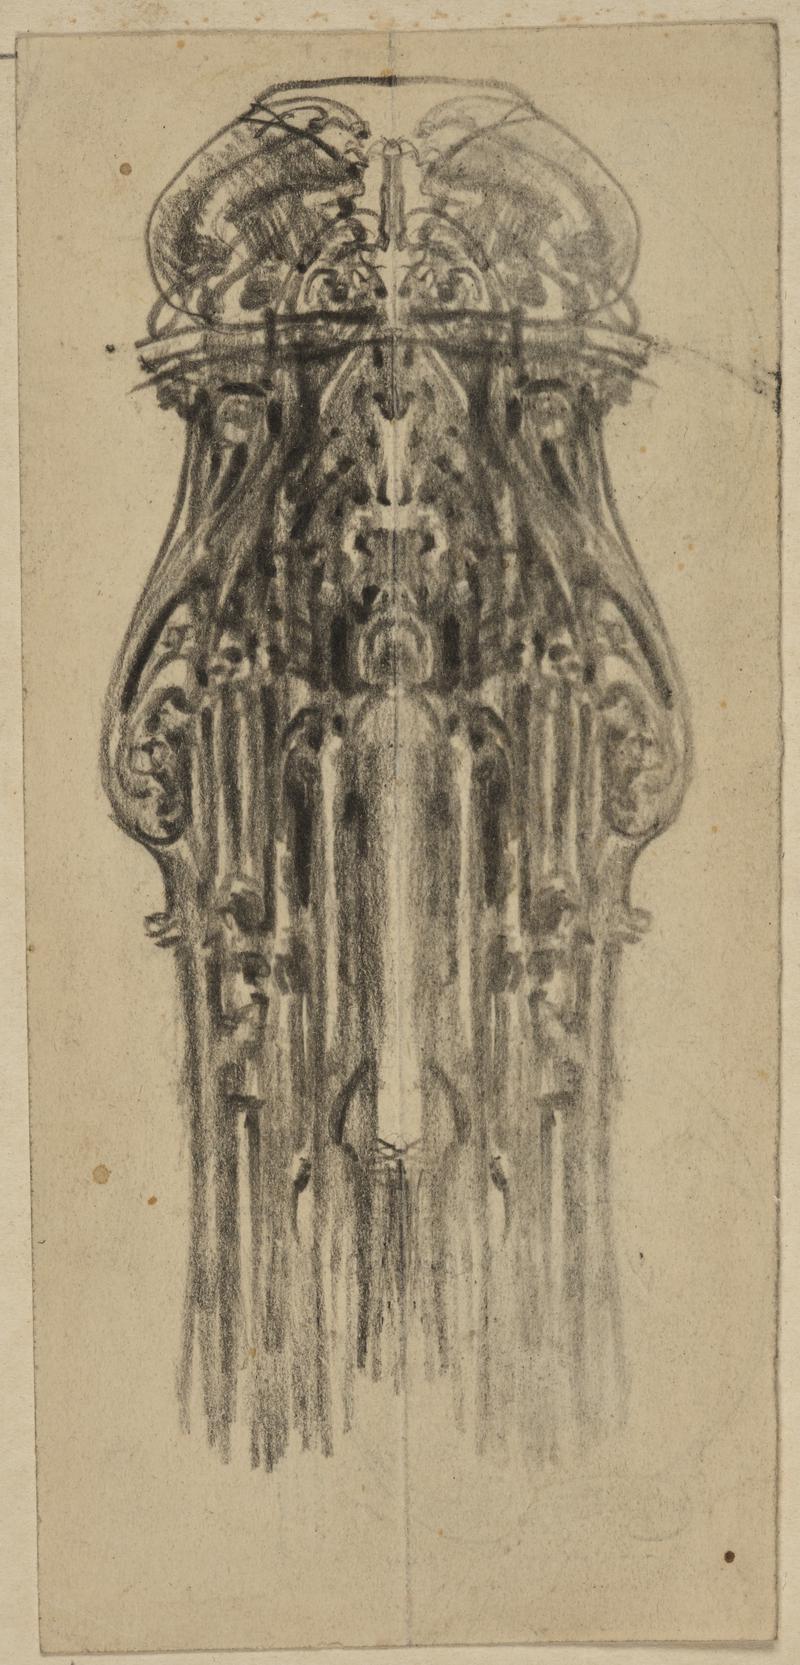 Sketches for decorative lamps and posts